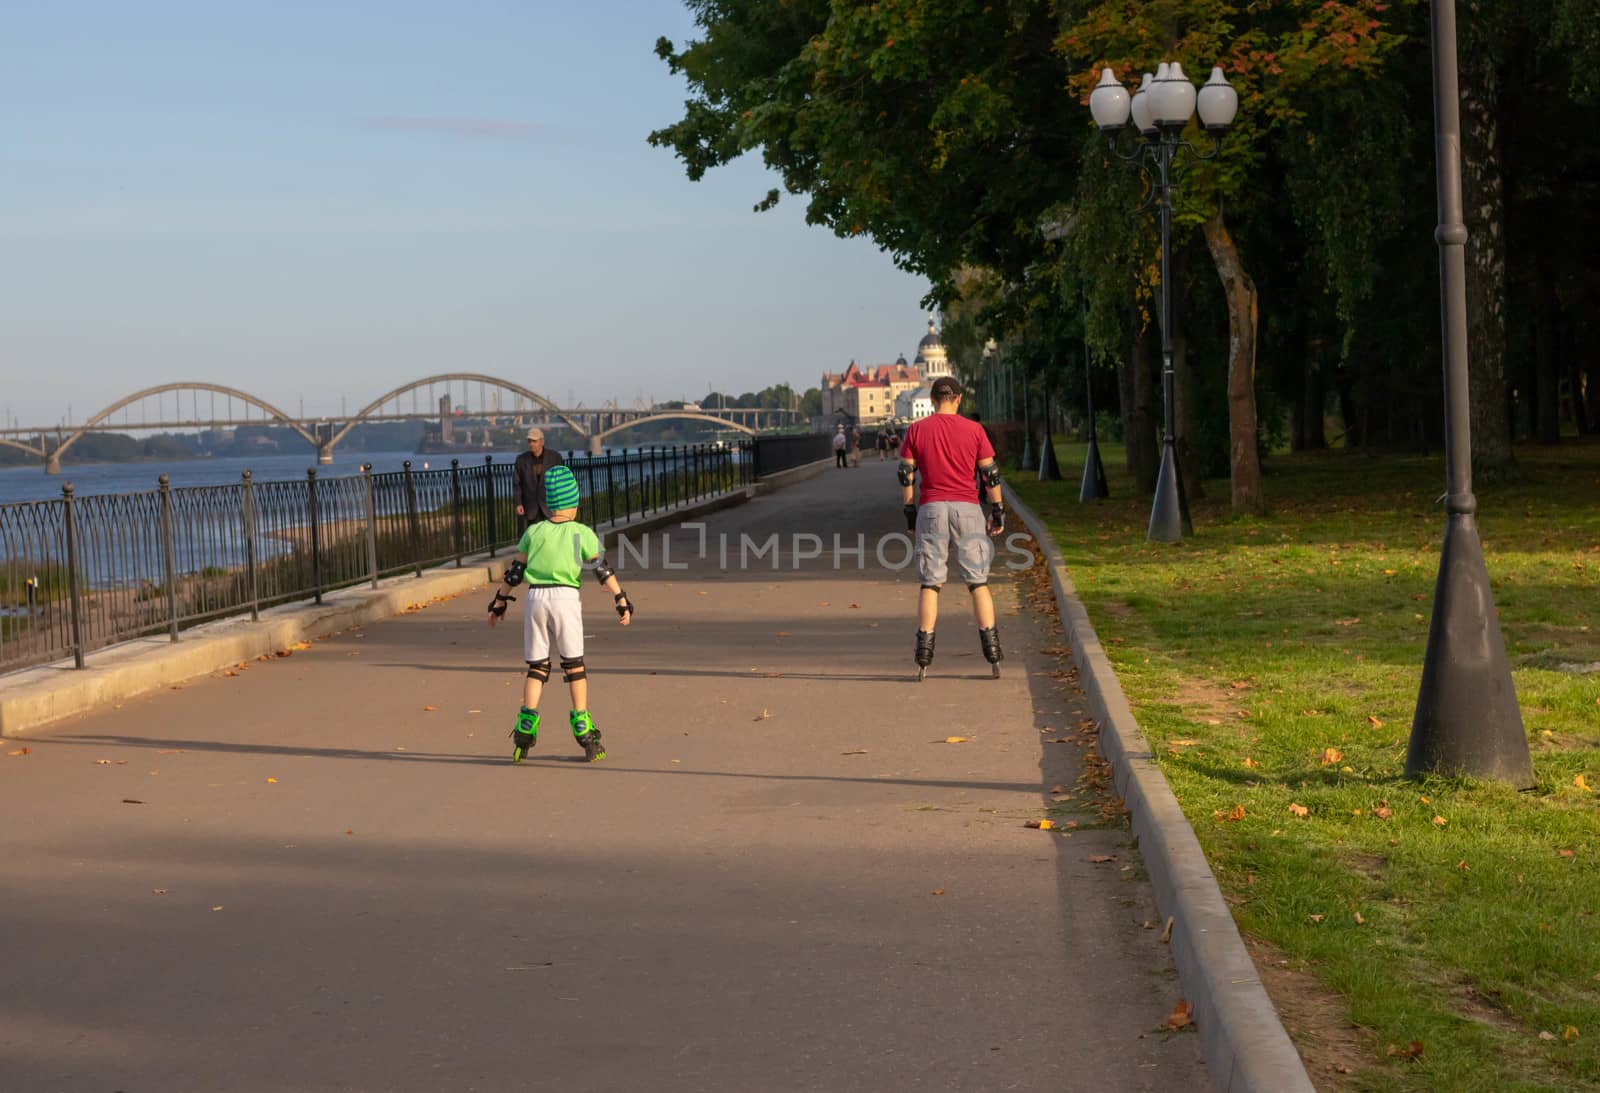 Father teching son roller skating in park by lapushka62